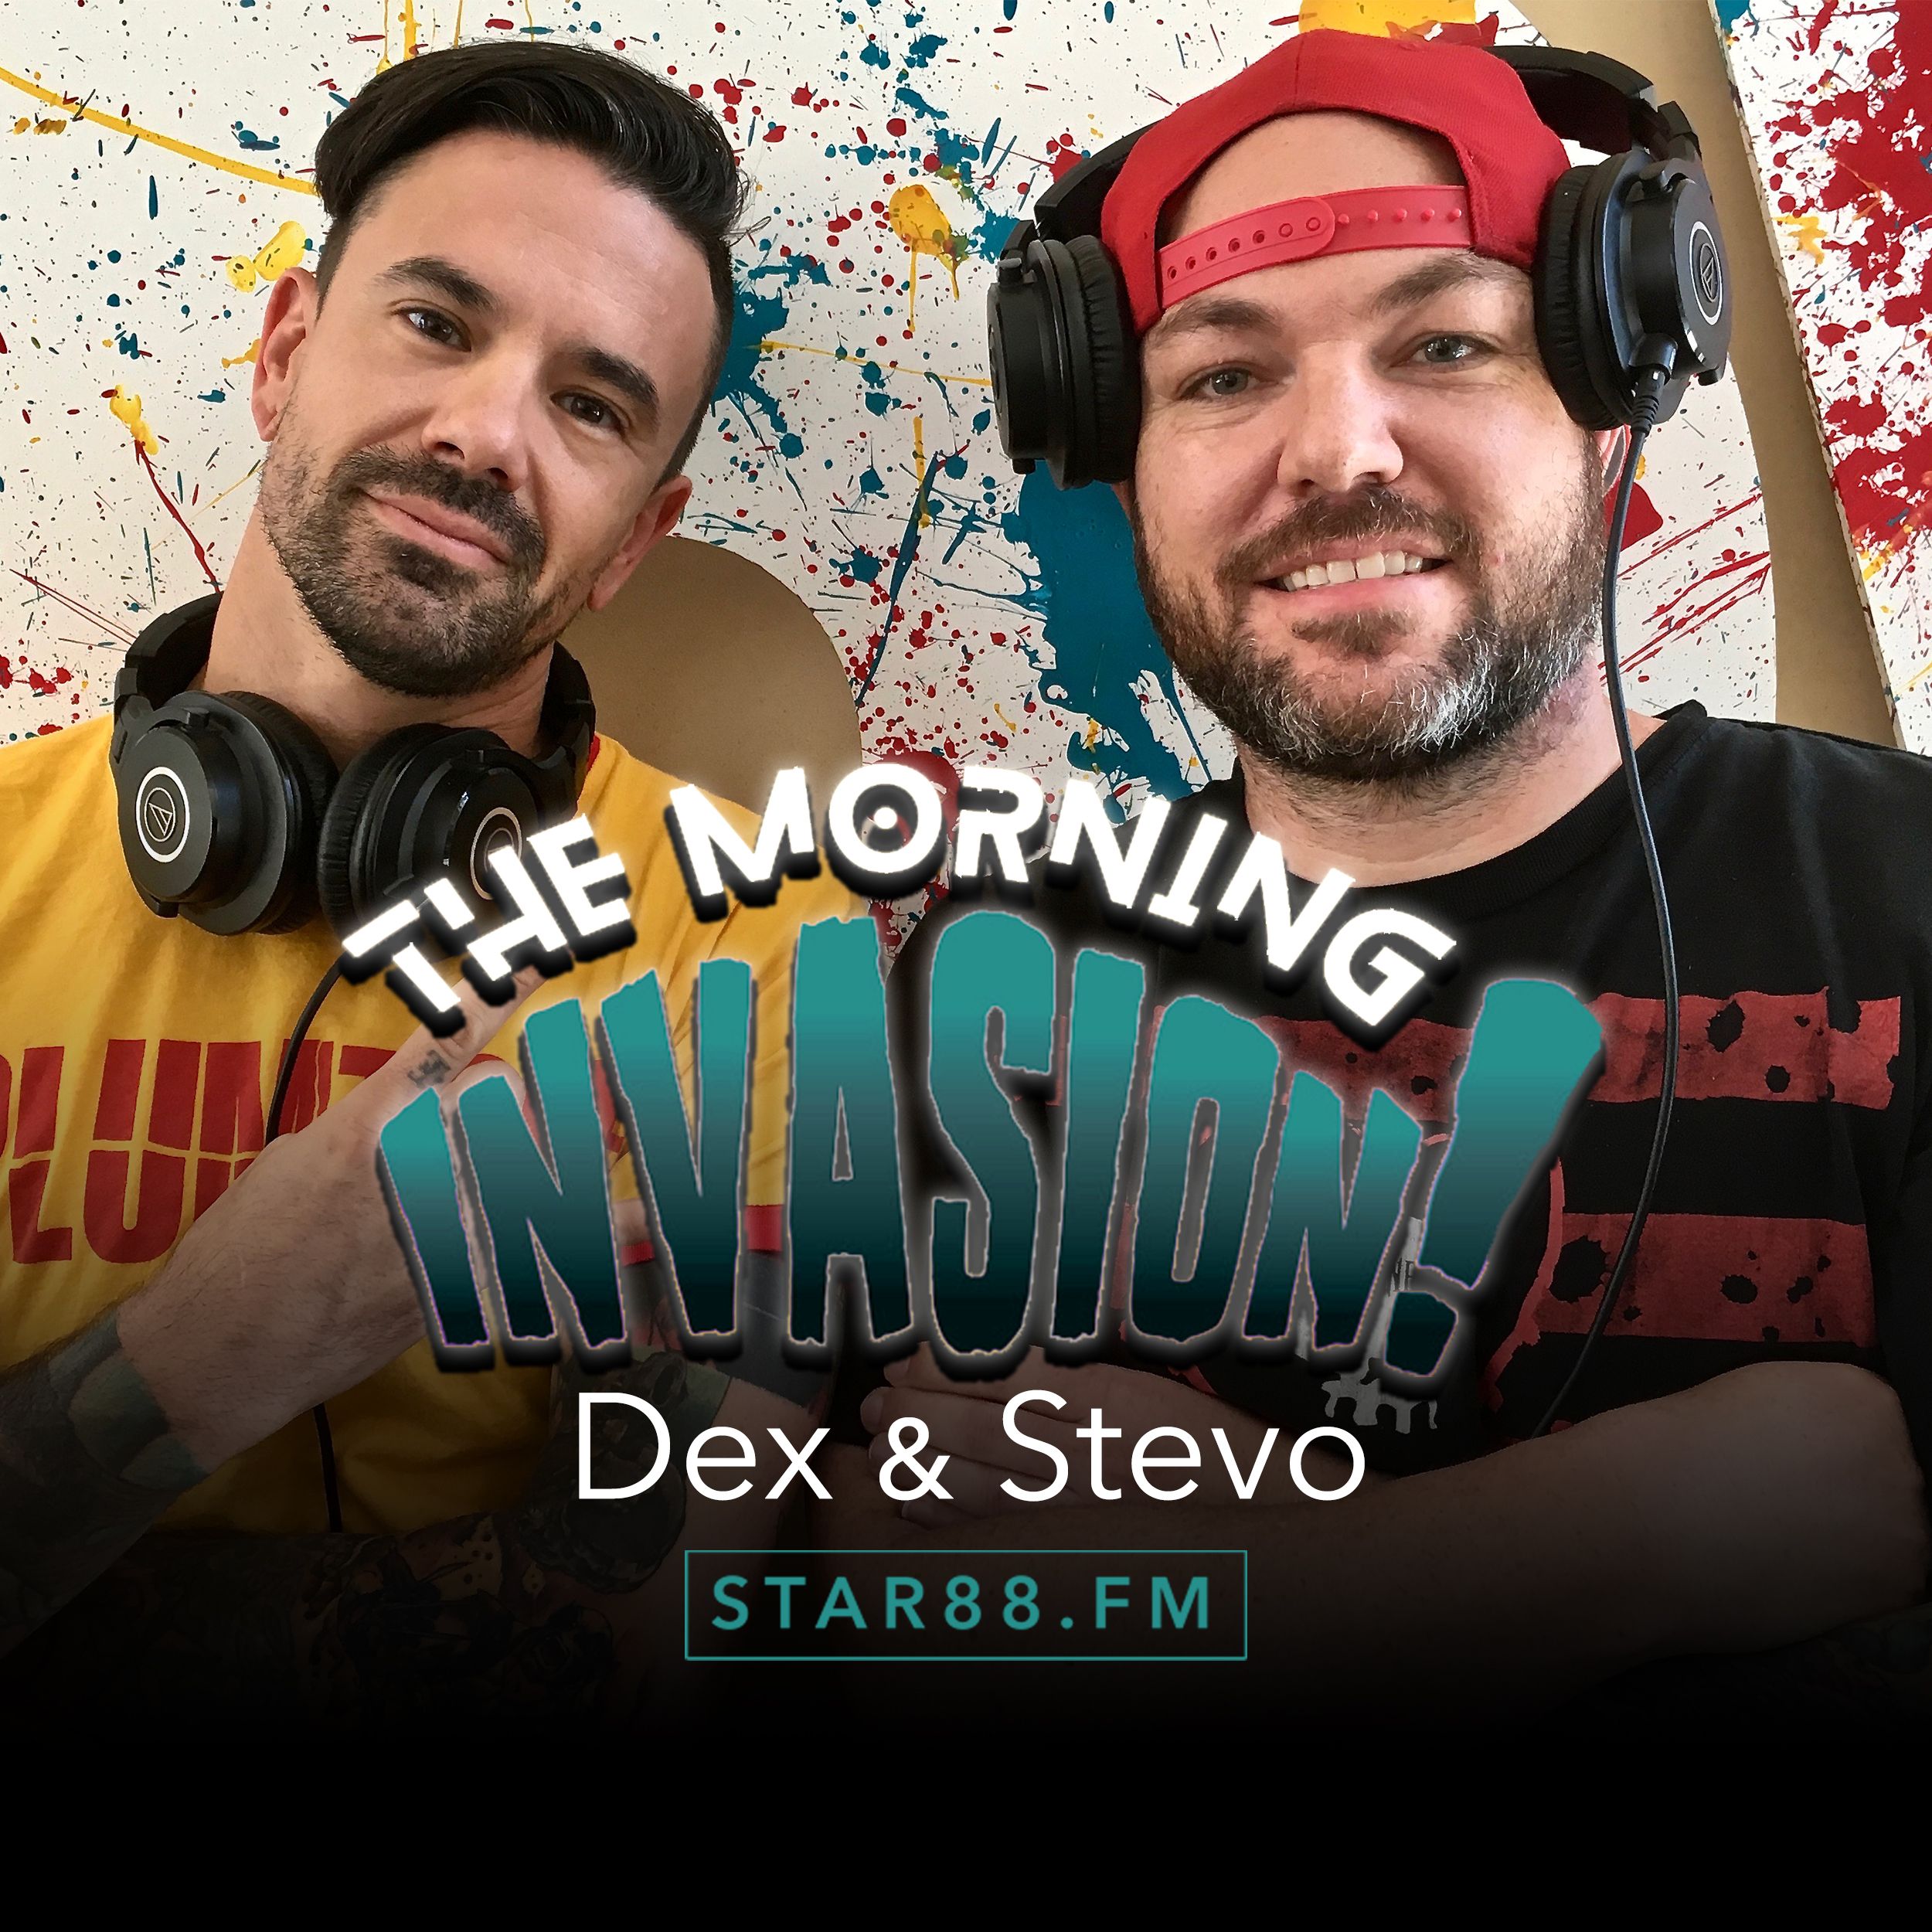 The Morning Invasion - March 11, 2019 - Hour 2 - Classic TV Hero Dies